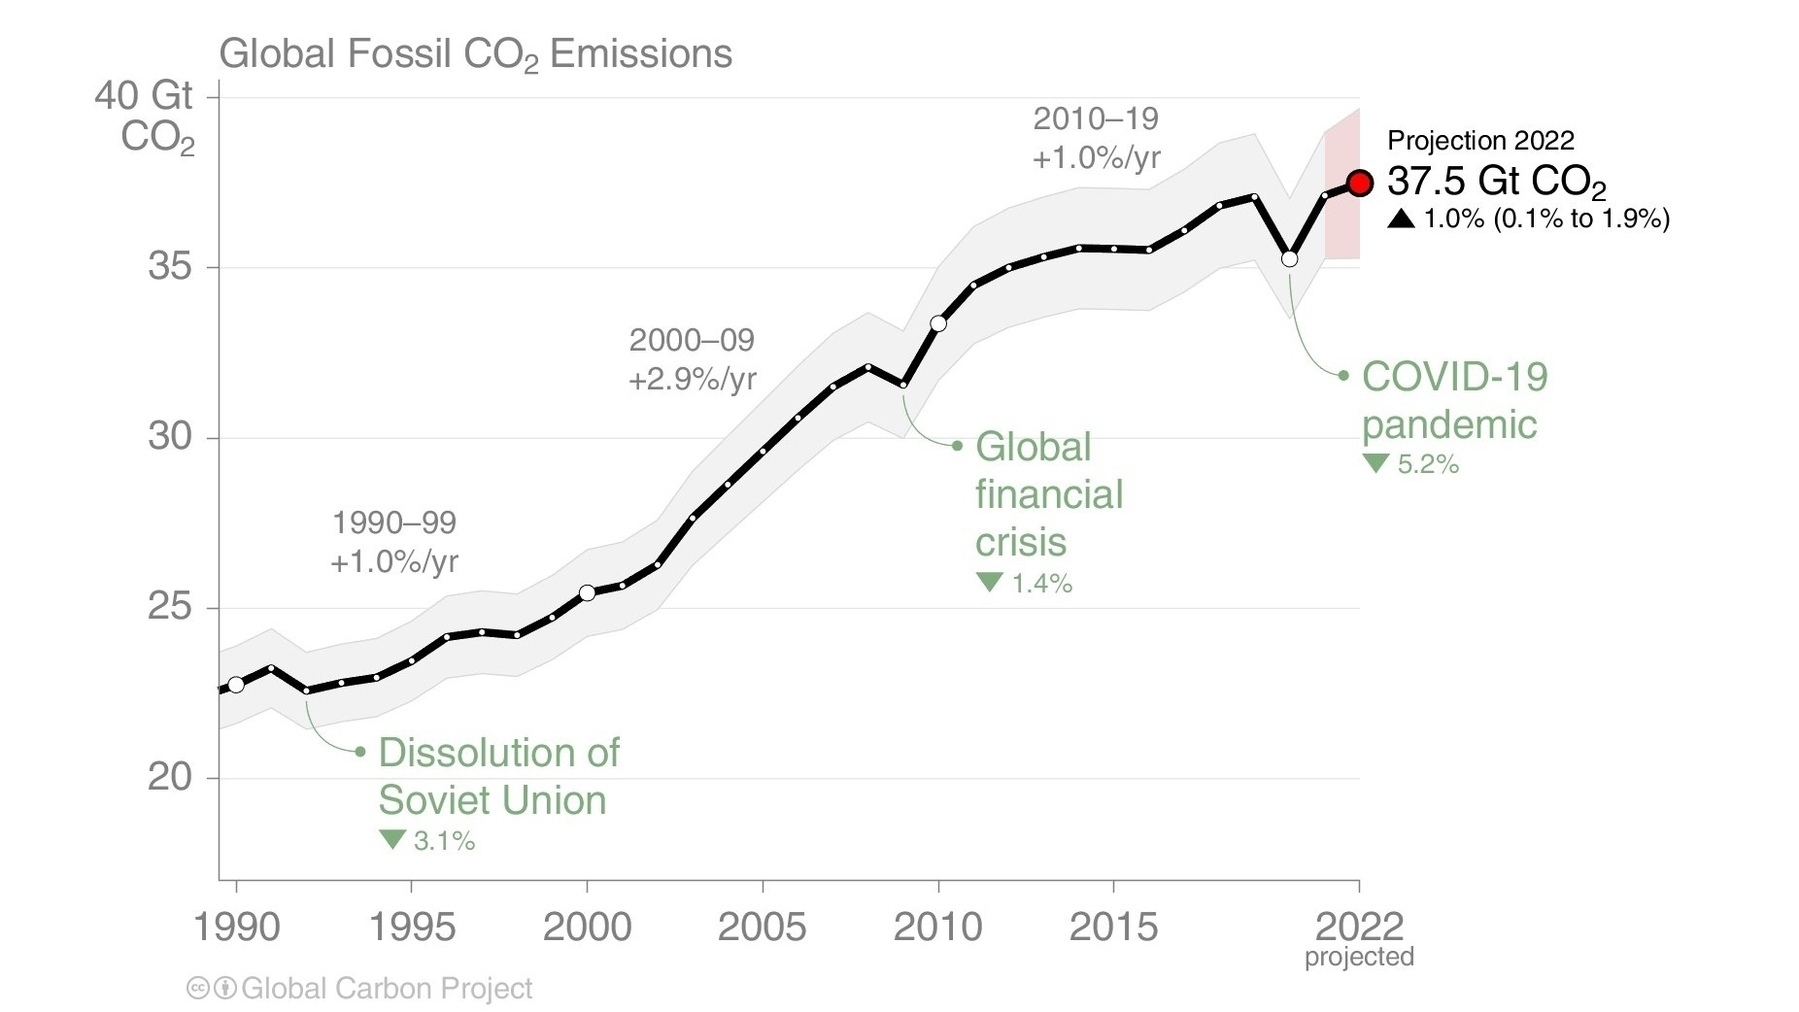 A chart showing Global Fossil CO2 emissions from 1992 to 2022